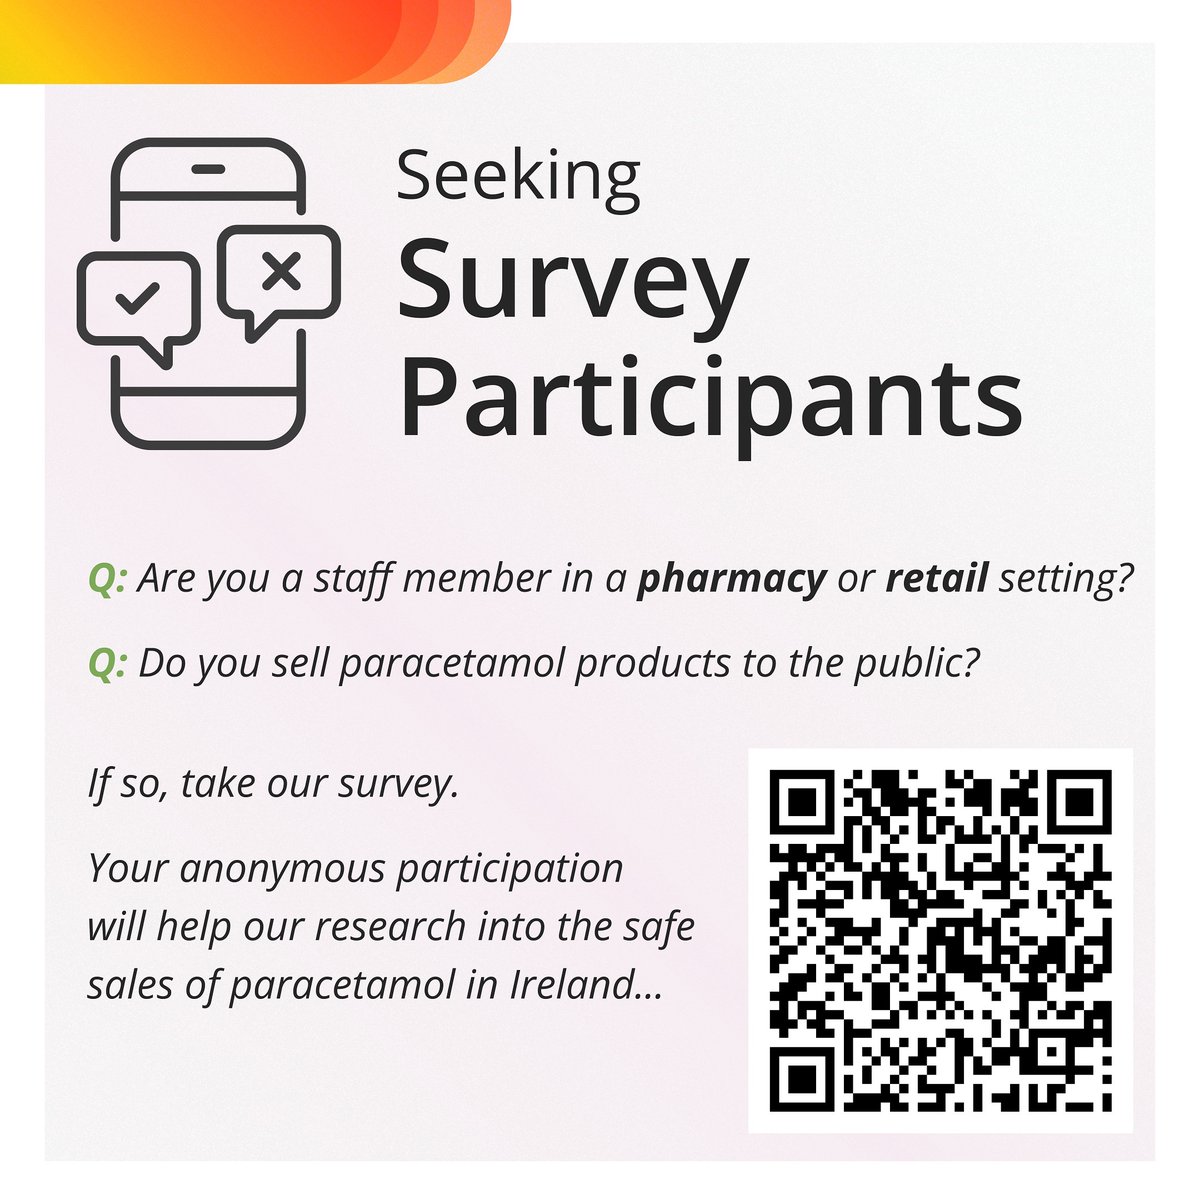 Do you work in a pharmacy and sell paracetamol products to the public? Please take a few minutes to complete this short online survey, which will help research the safe sale of paracetamol in Ireland. The survey is anonymous. Survey responses will help to understand how to